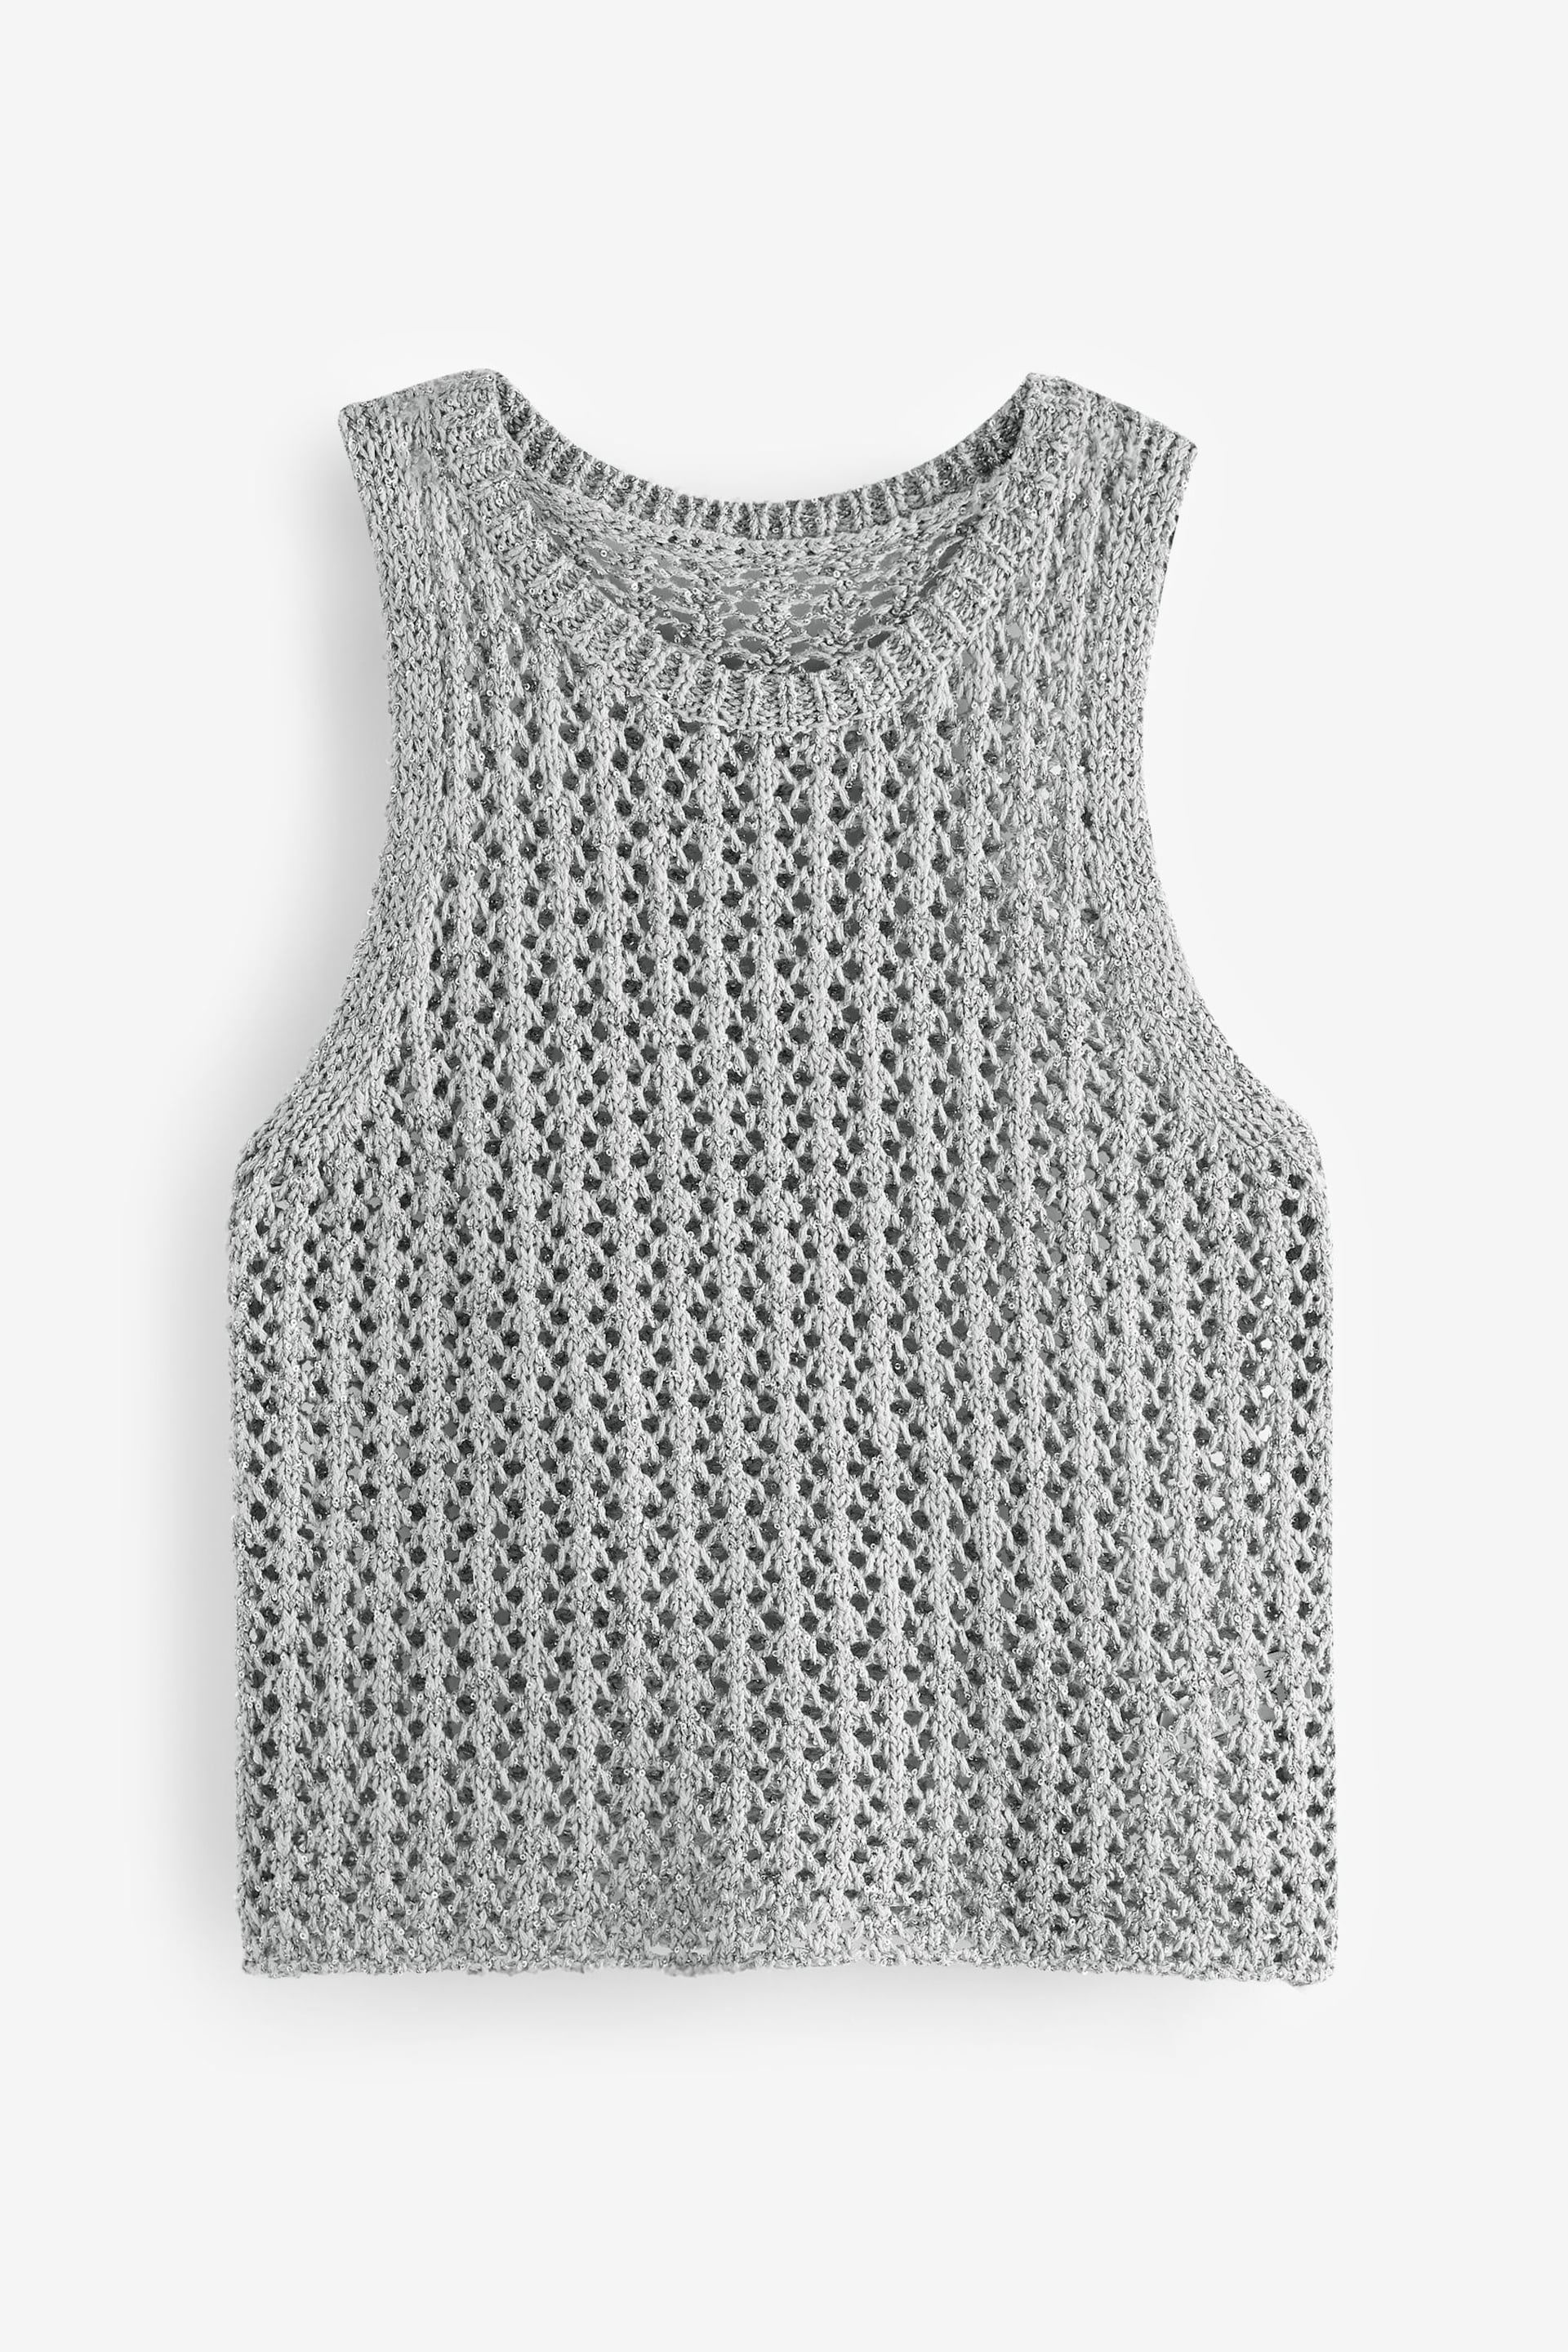 Grey Knitted Sequin Tank - Image 6 of 7